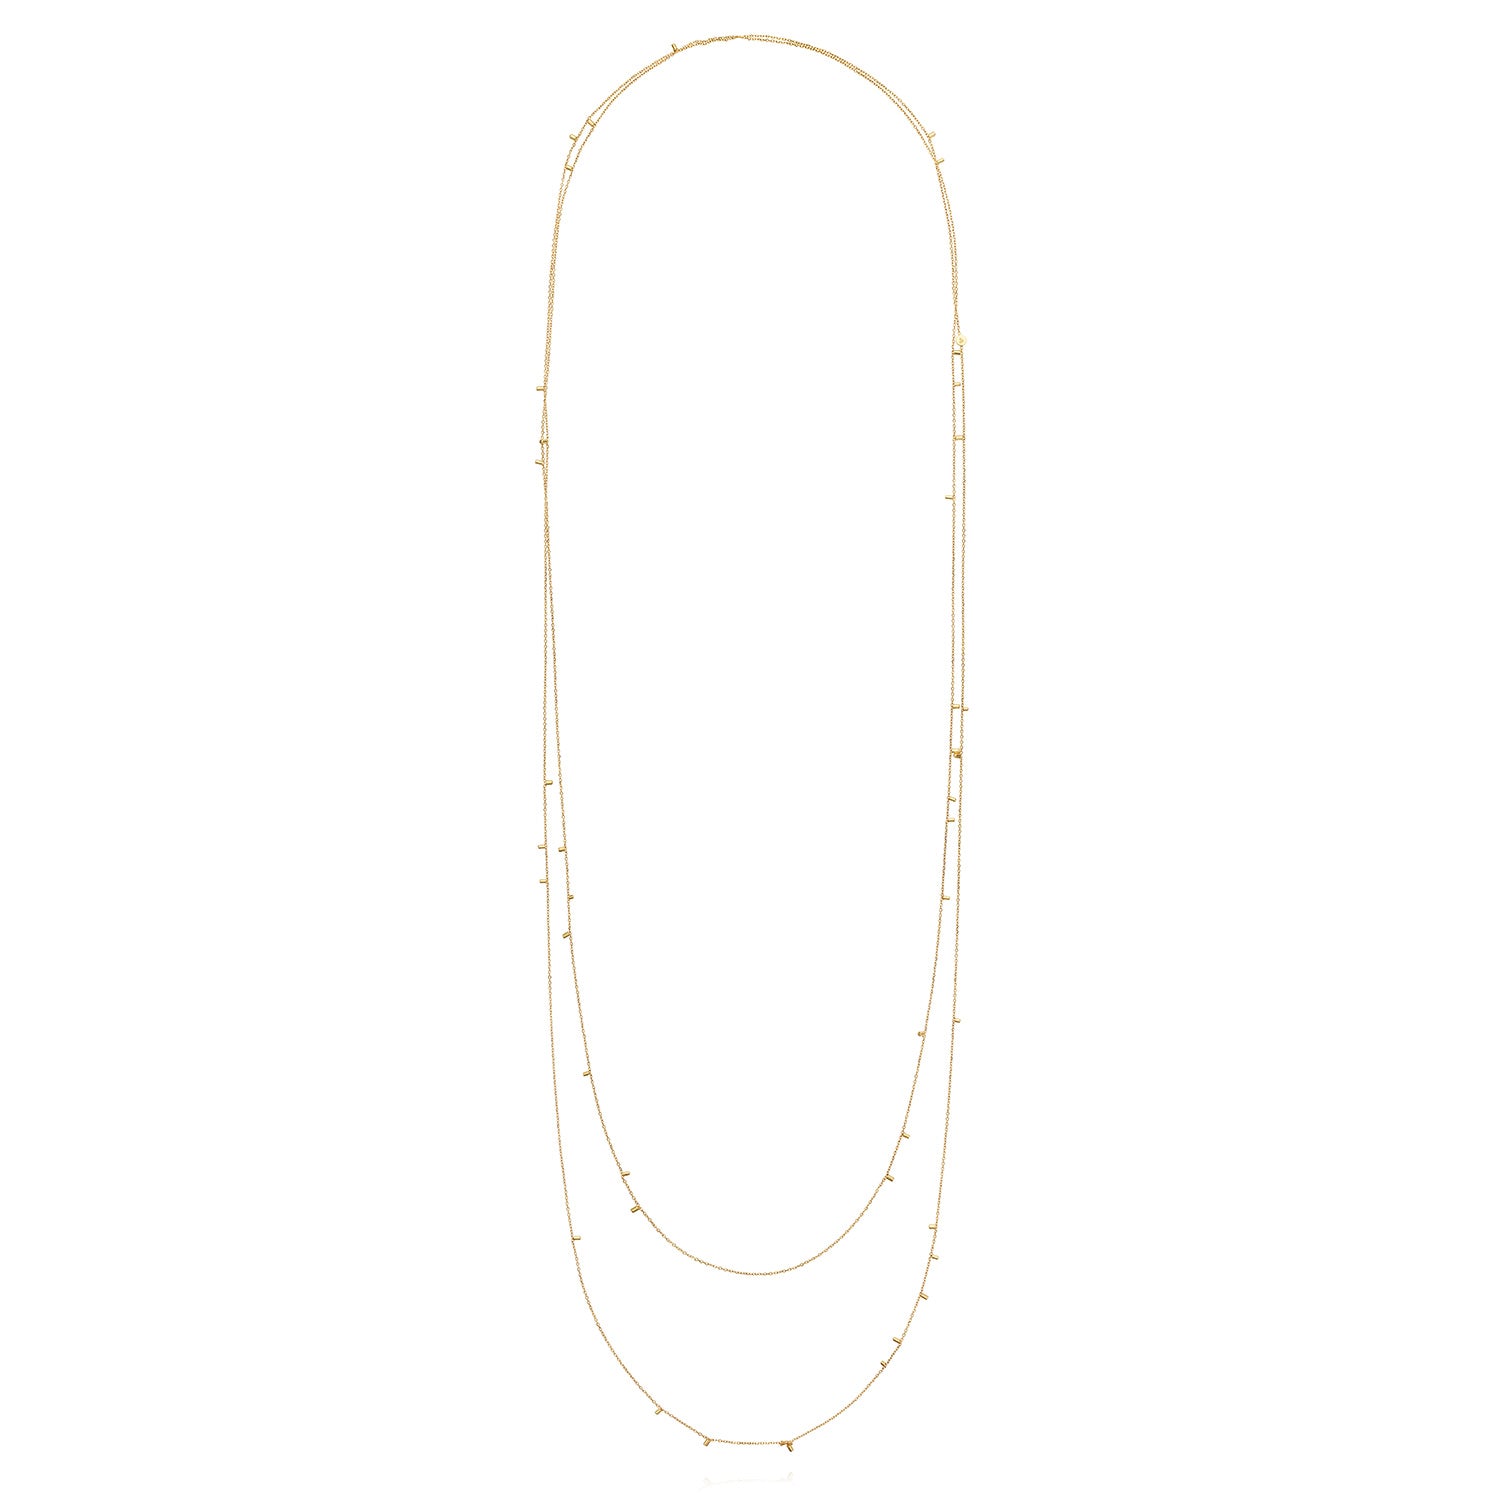 This fabulous long 18ct yellow necklace made of fine chain sprinkled with a shimmering of gold embellishments is part of our Gold Dust Collection